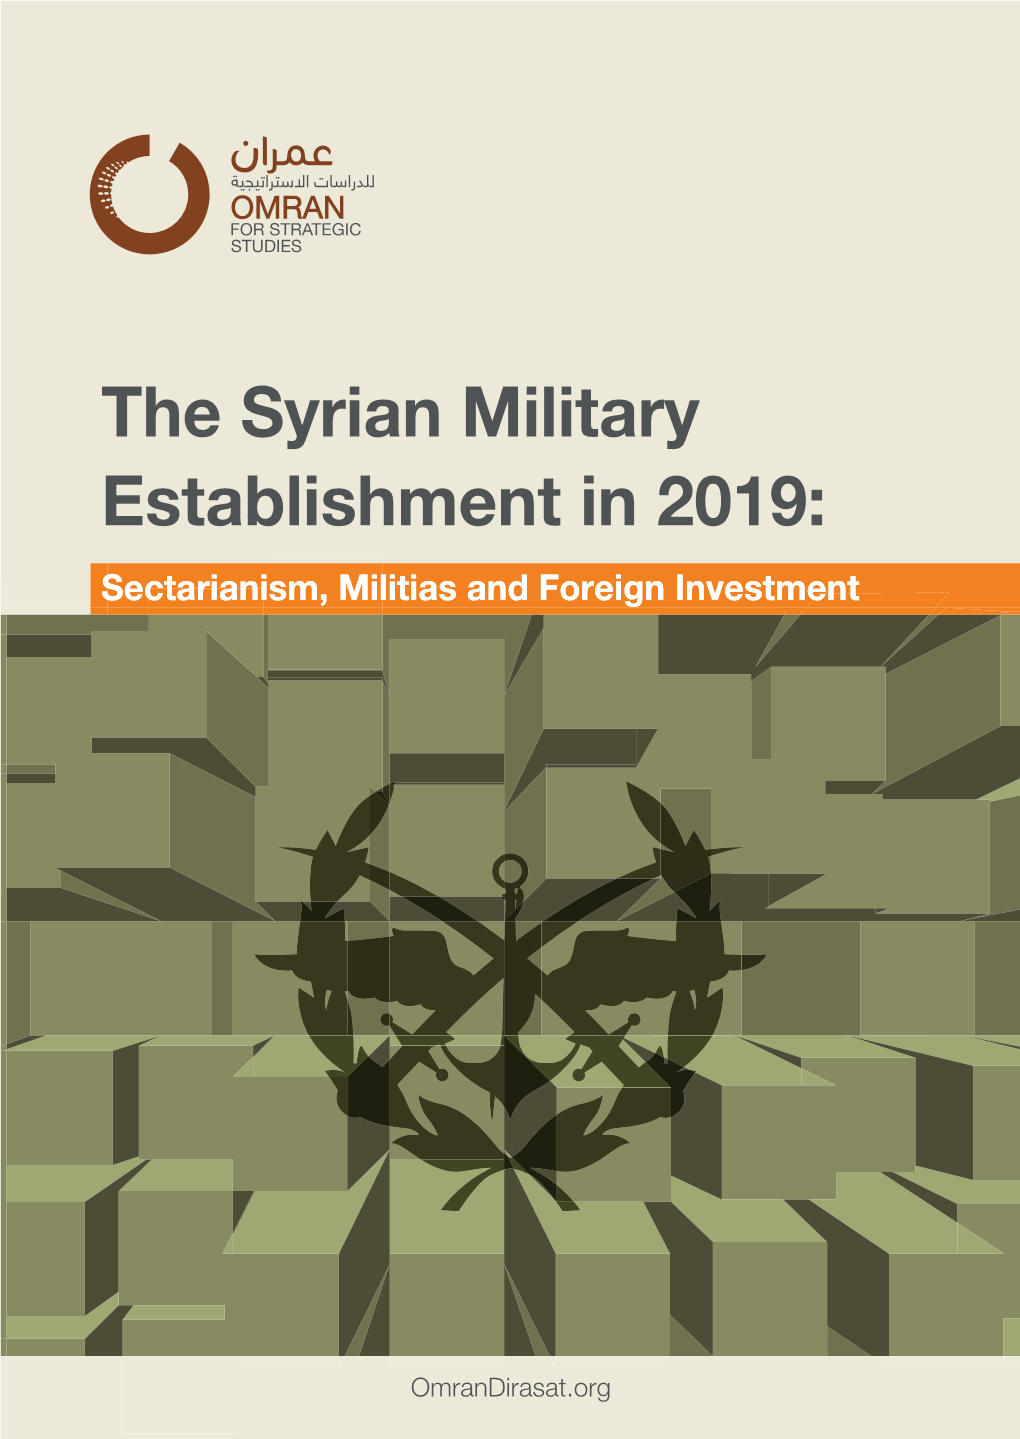 The Syrian Military Establishment in 2019: Sectarianism, Militias, and Foreign Investment